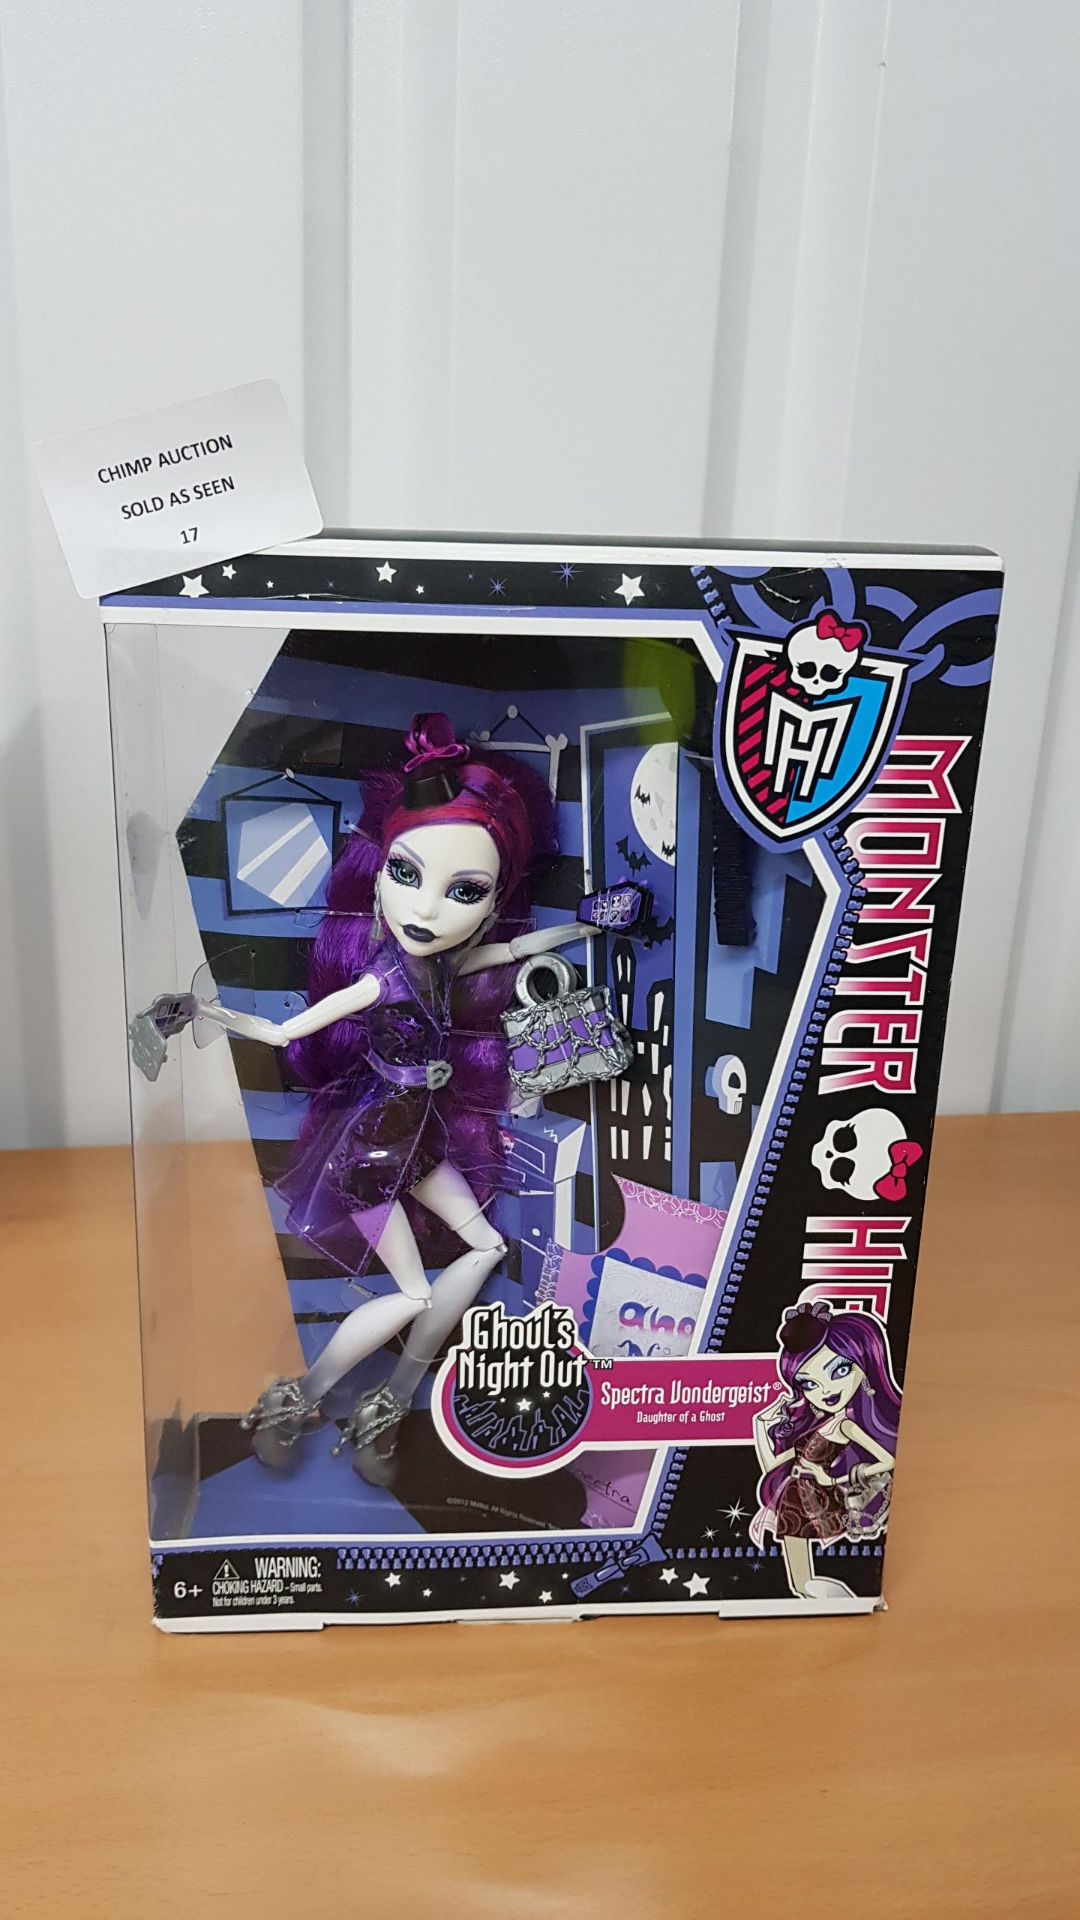 BRAND NEW Monster High Ghouls Night Out Doll Spectra Vondergeist RRP £39.99.